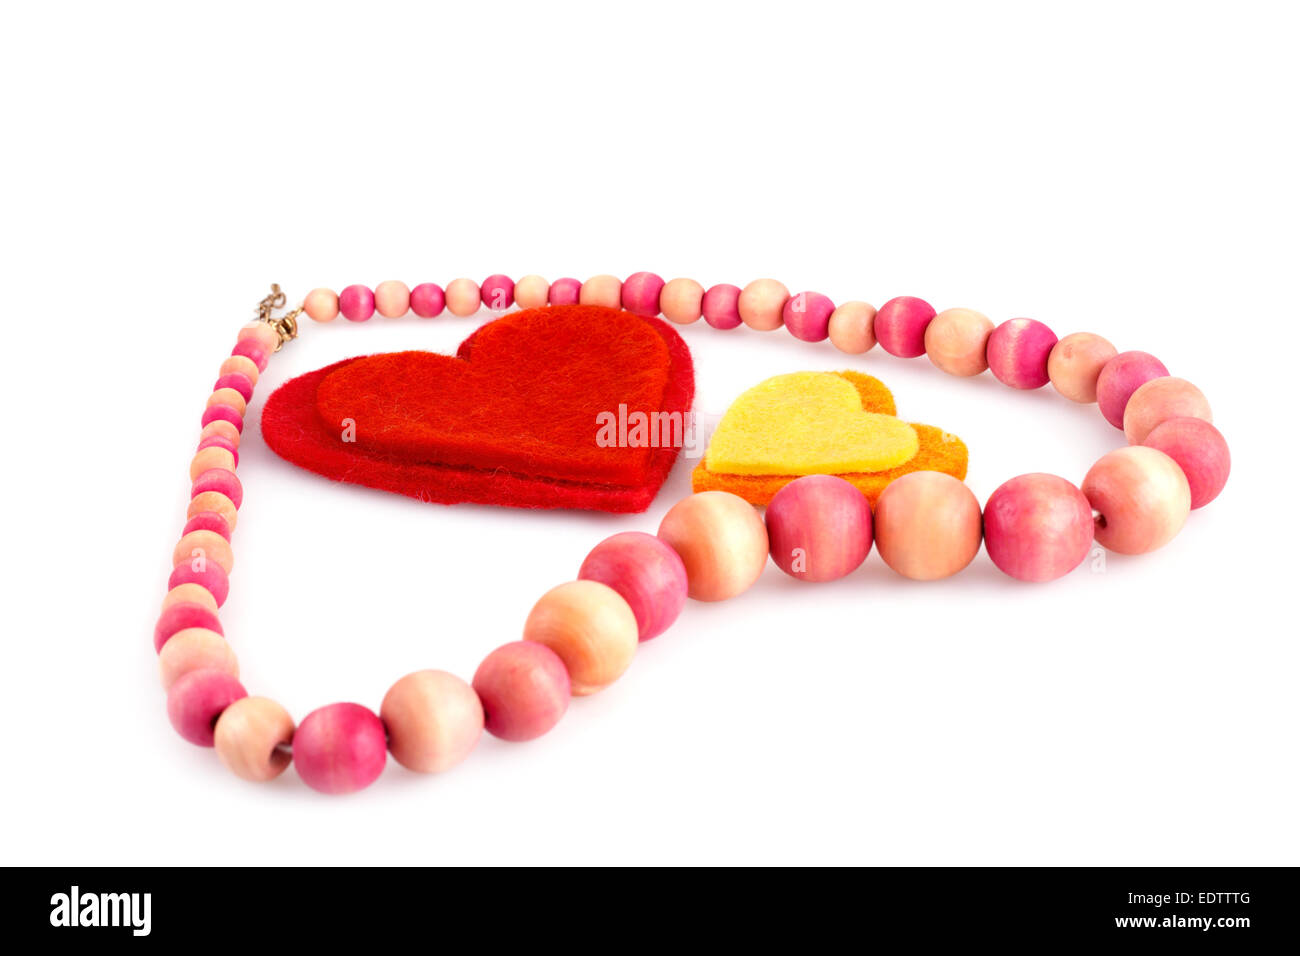 Wooden Beads on a String making a Colorful Toy Necklace Stock